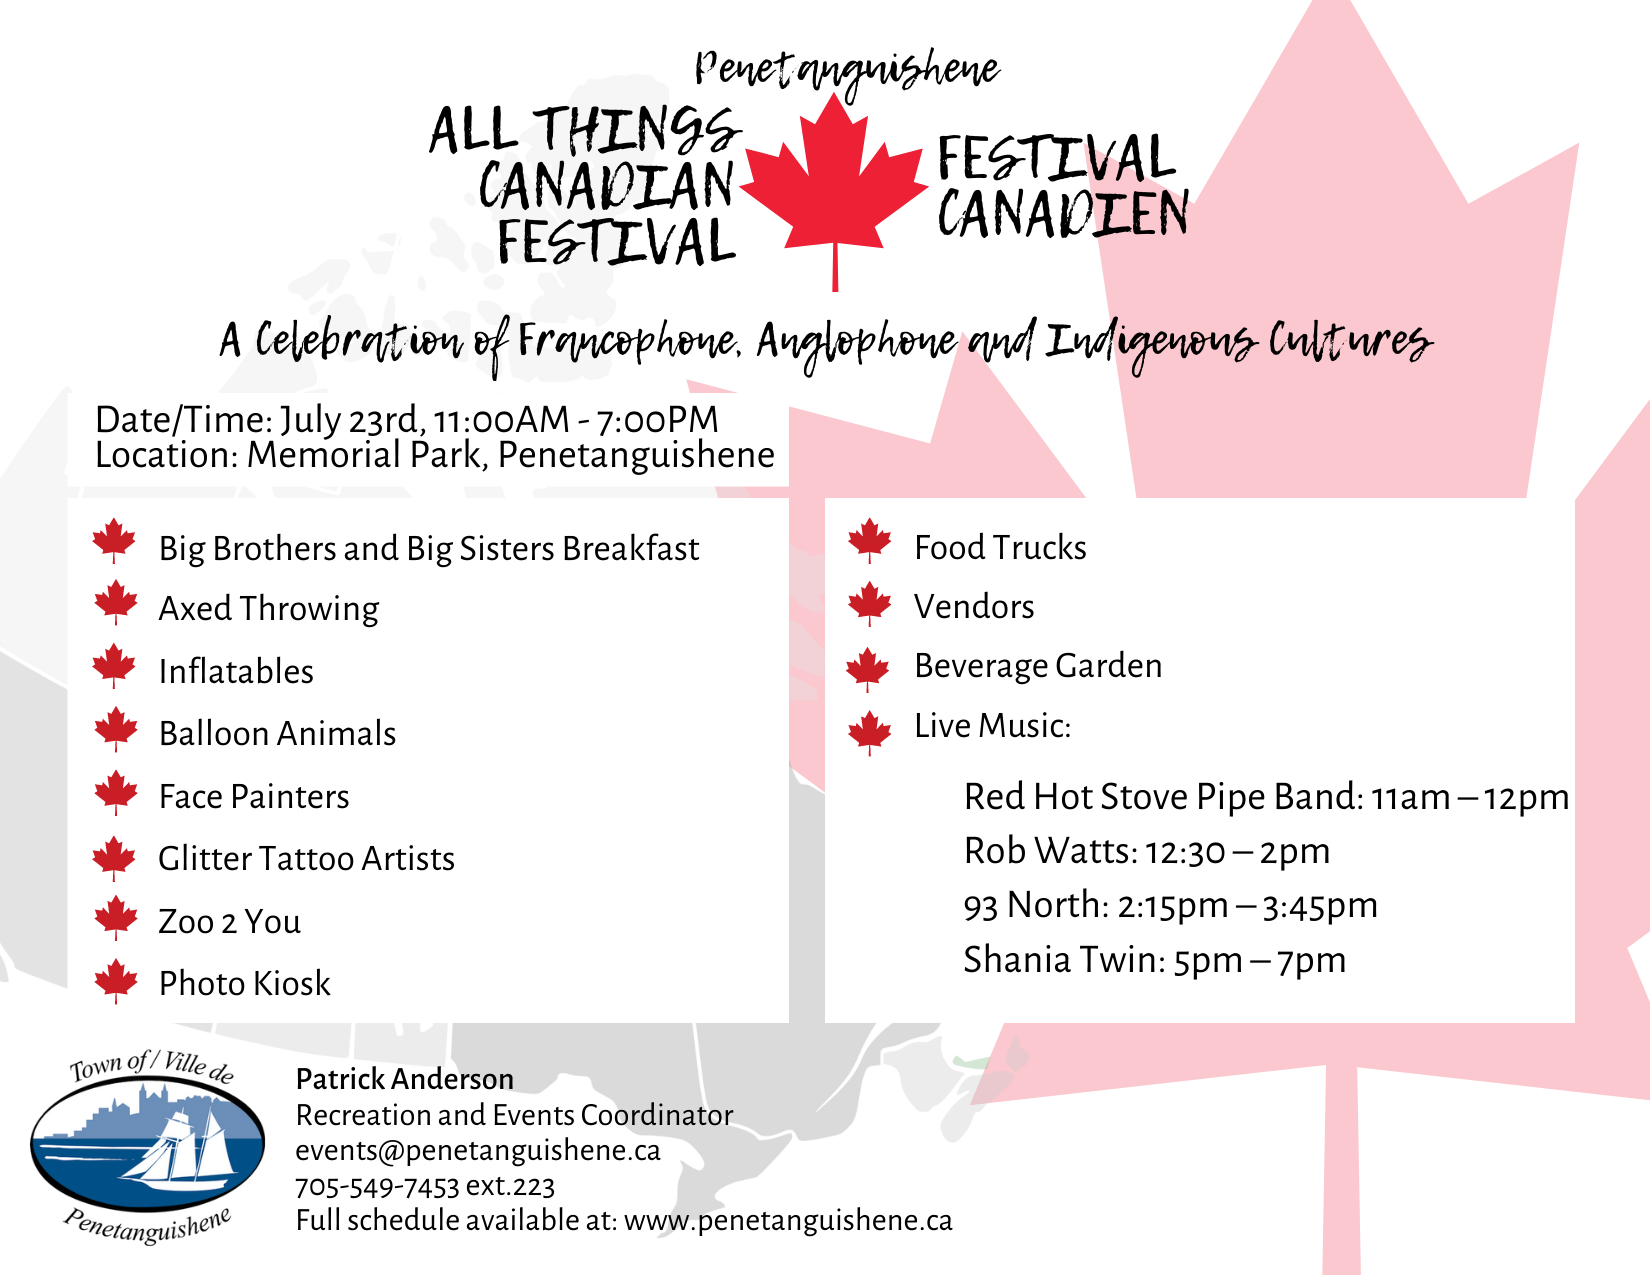 All Things Canadian Festival